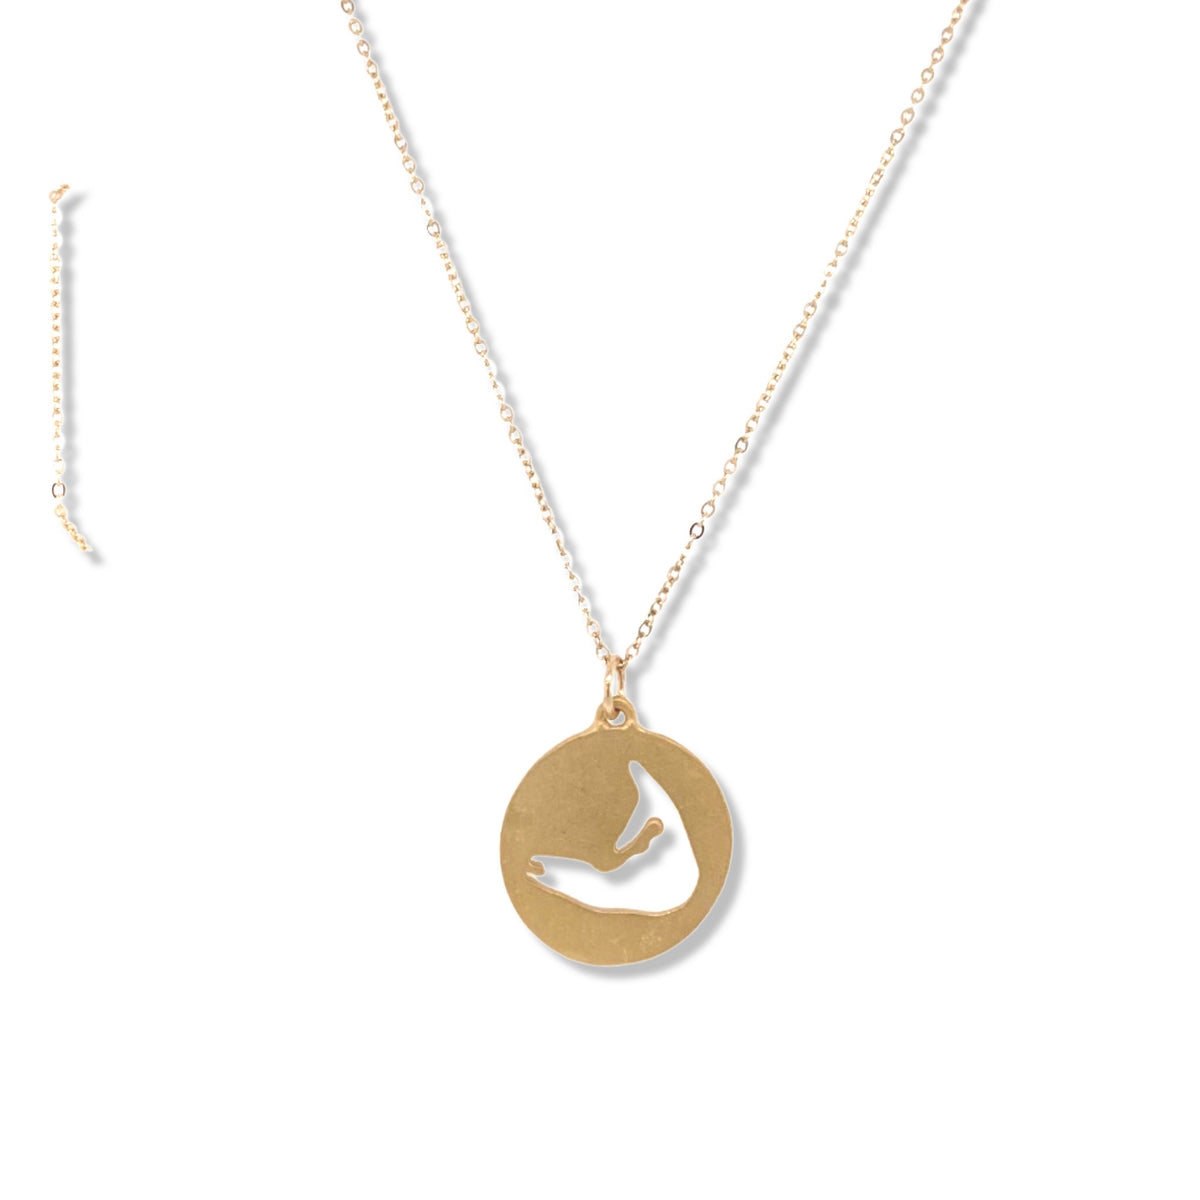 Downtown Nantucket Gold Necklace | Keely Smith Jewelry